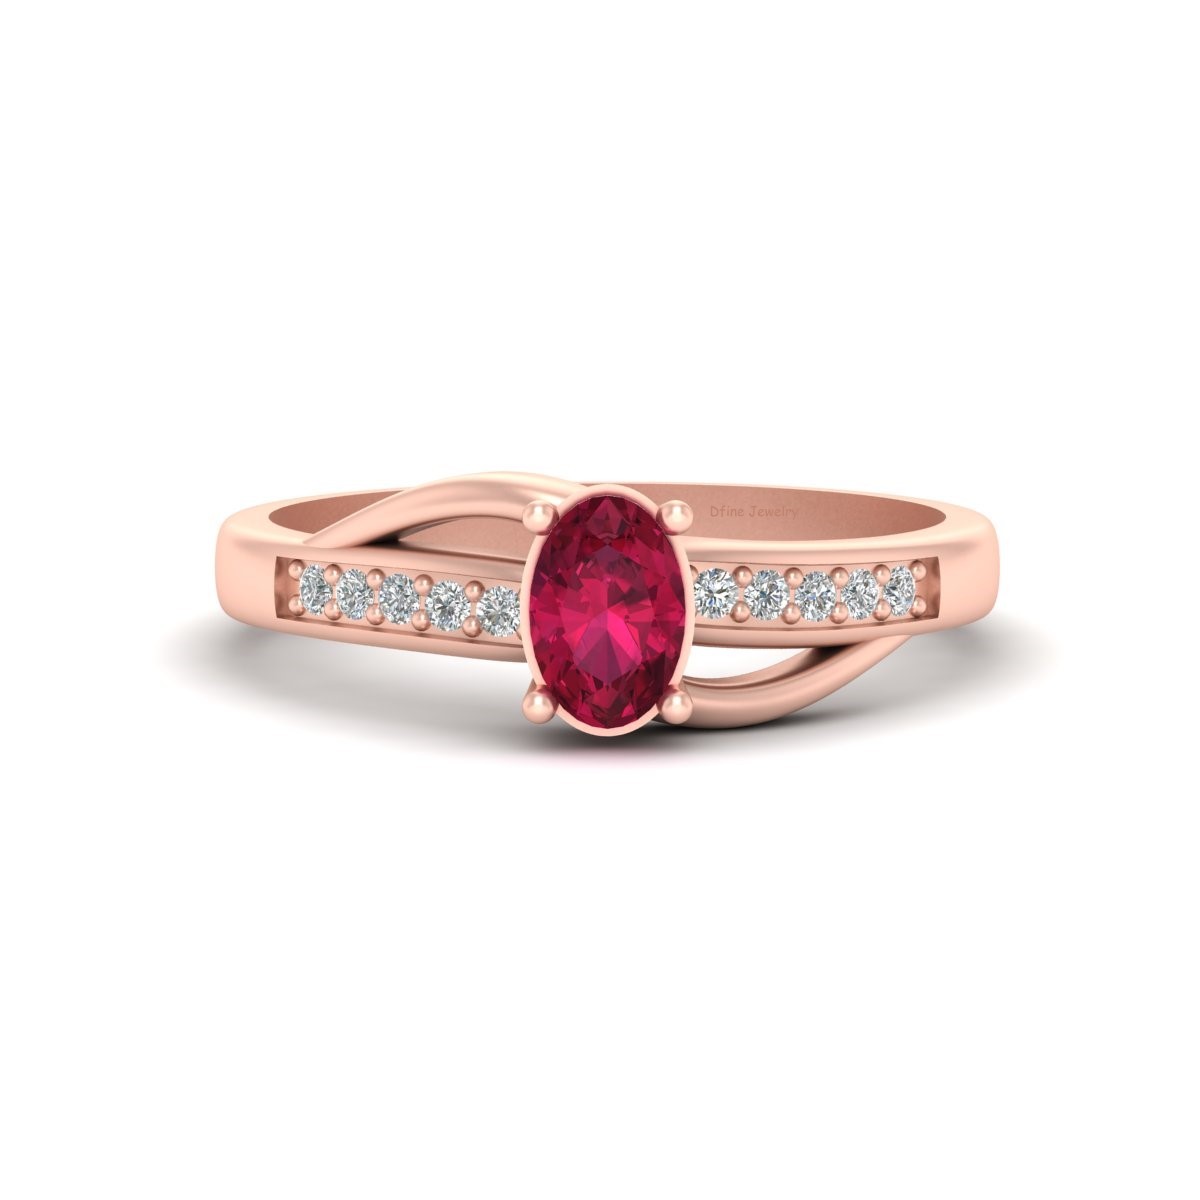 Oval Cut Pink Ruby Bridal Wedding Ring Jewelry Diamond Promise Ring Gift For Her